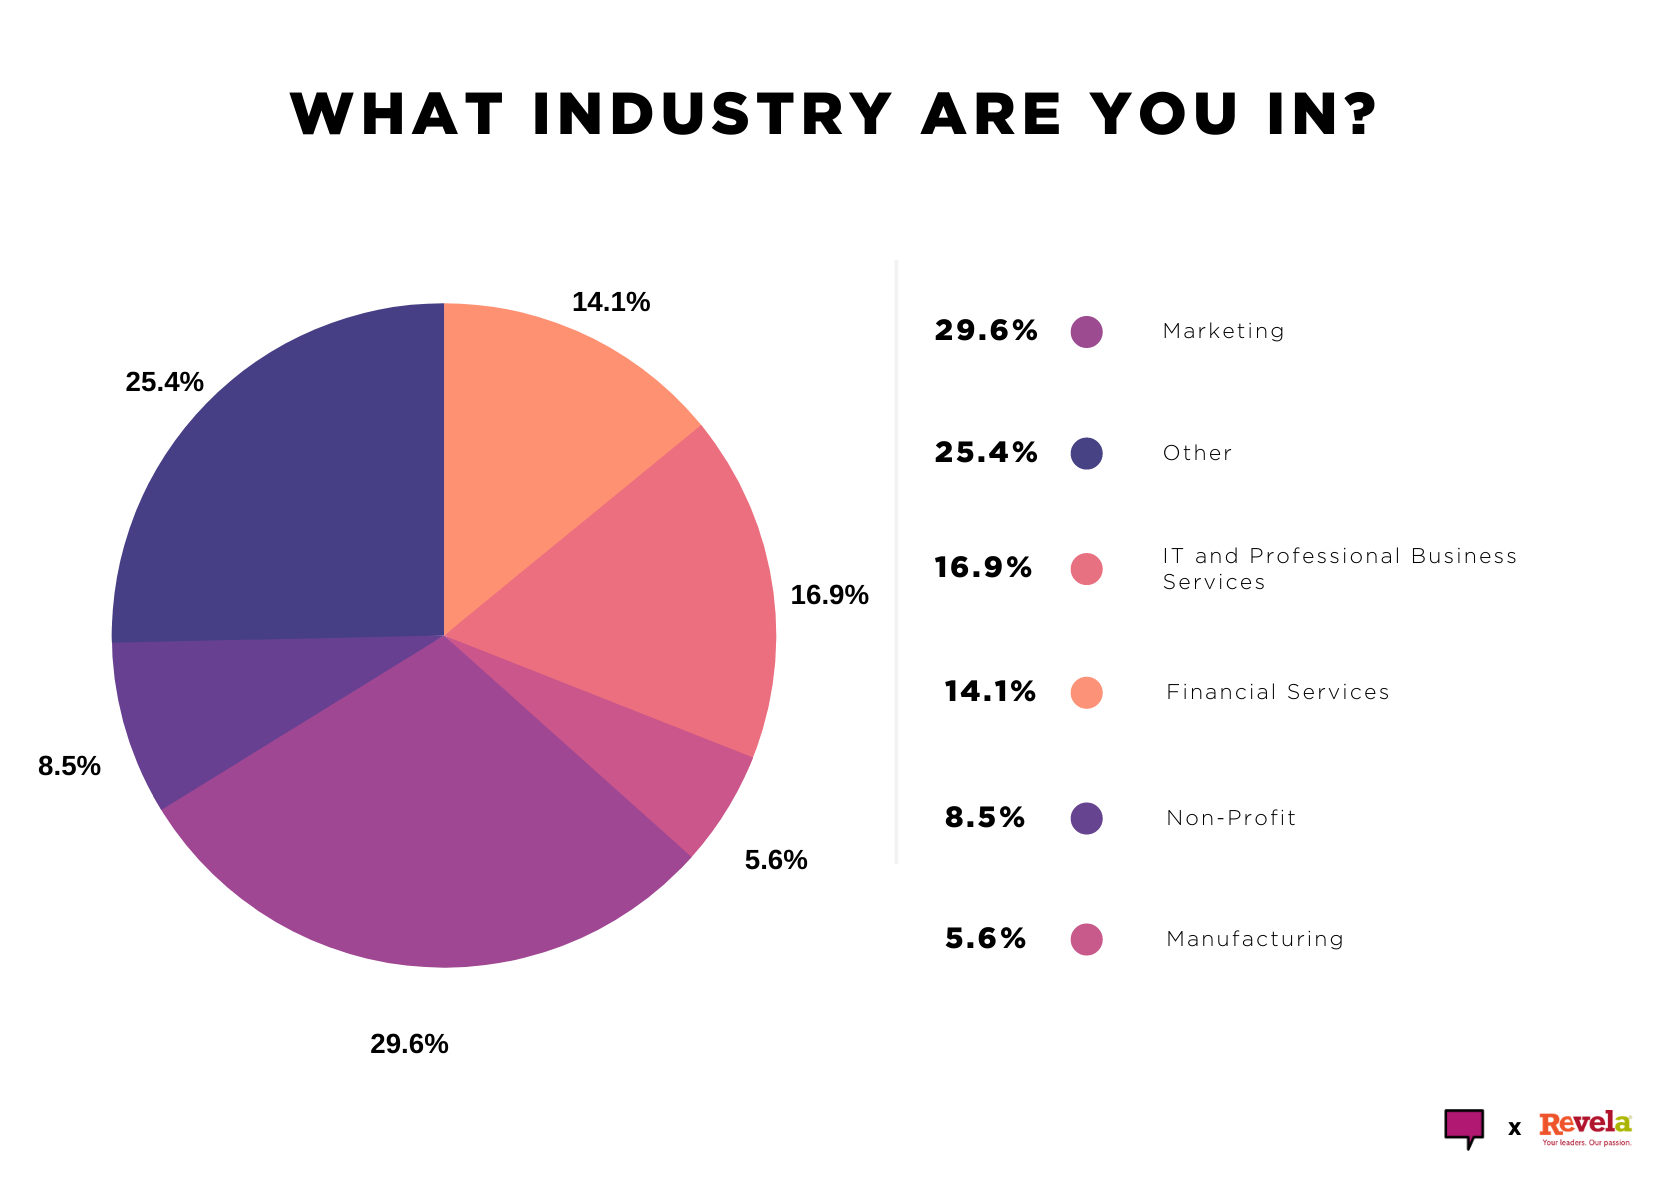 What industry are you in?